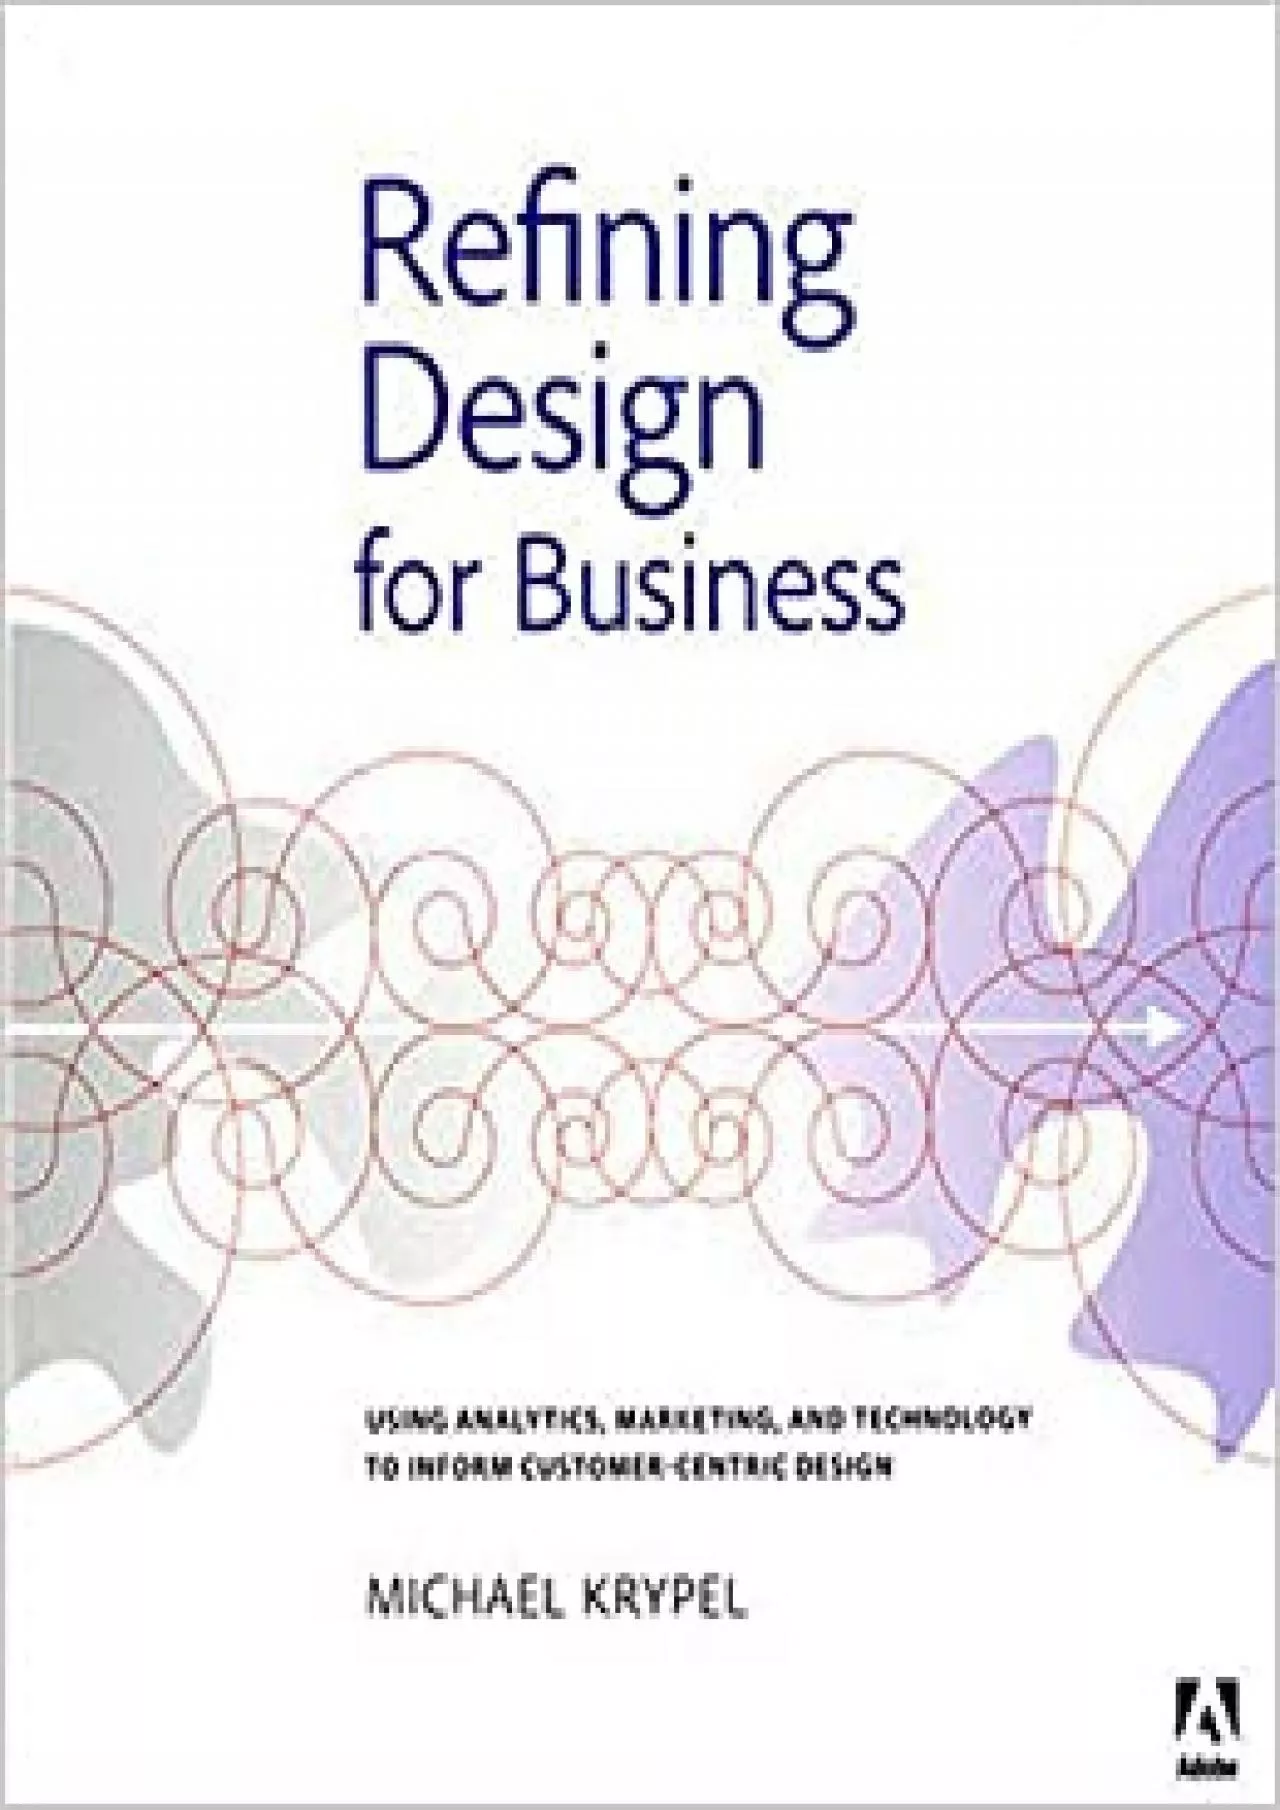 Refining Design for Business Using Analytics, Marketing, and Technology to Inform Customer-Centric